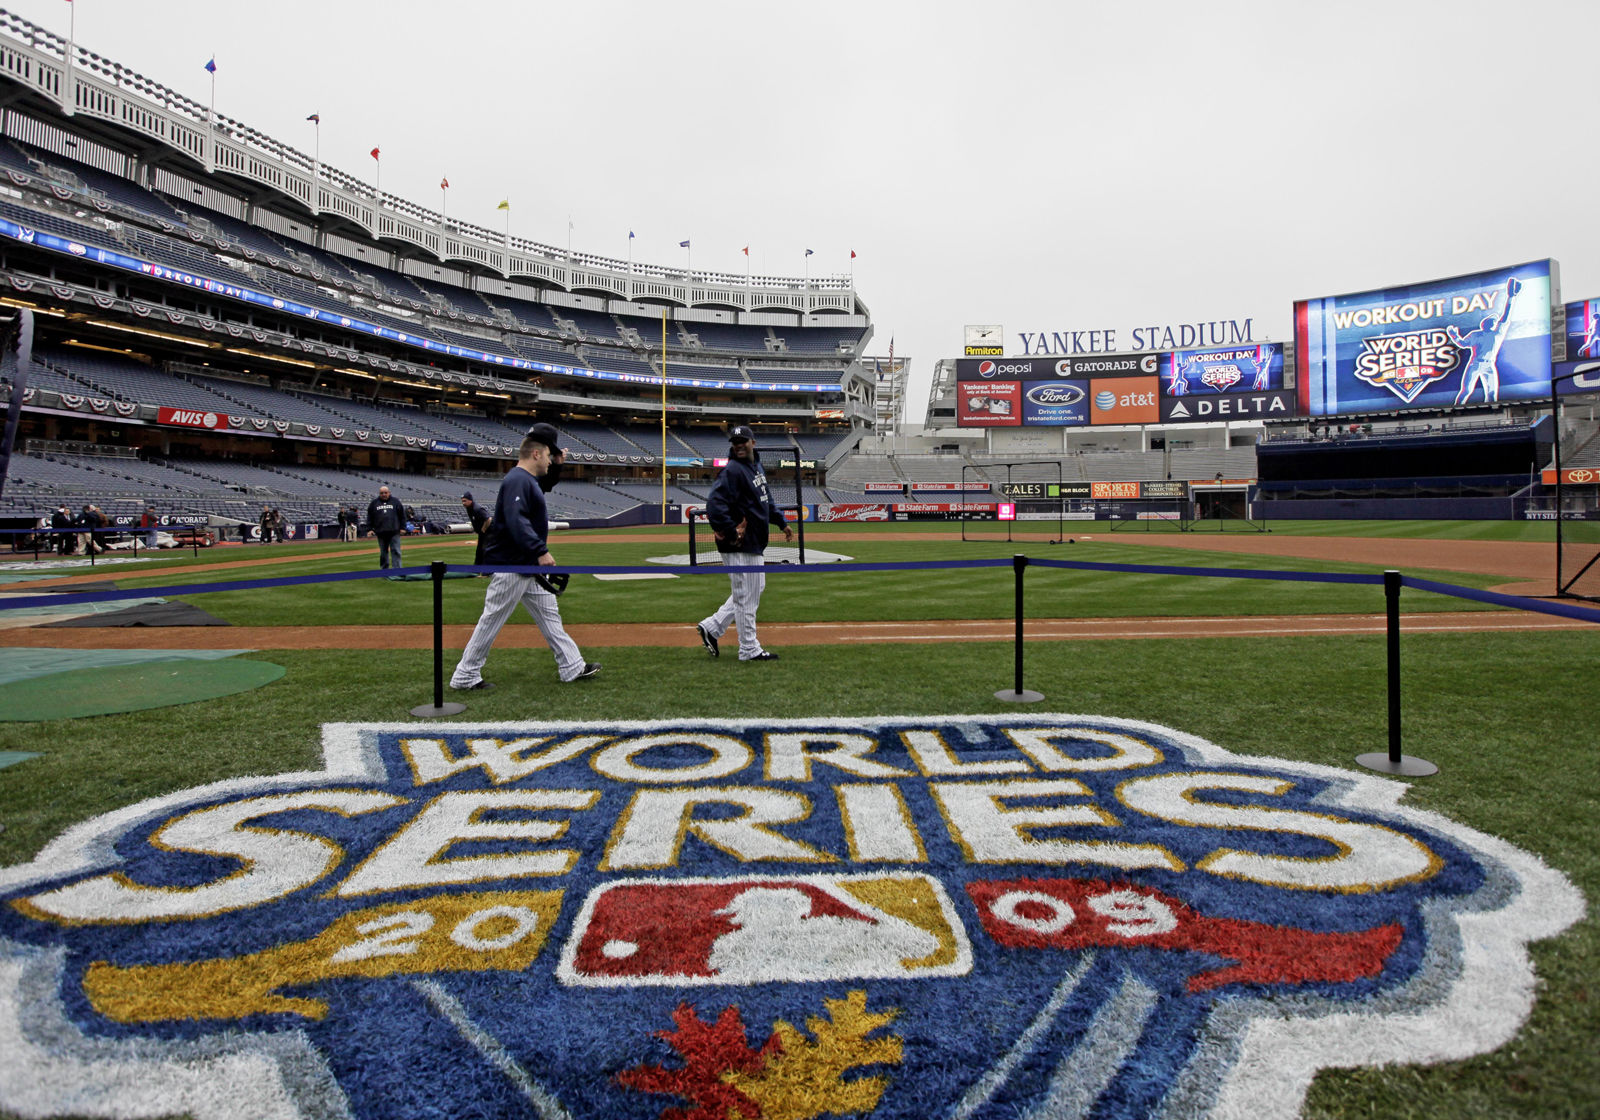 The Yankees are one of the most recognizable teams in all of sports, so it's only fitting they have the most expensive stadium in baseball. The average cost comes in at $95. File. (AP Photo/David J. Phillip)